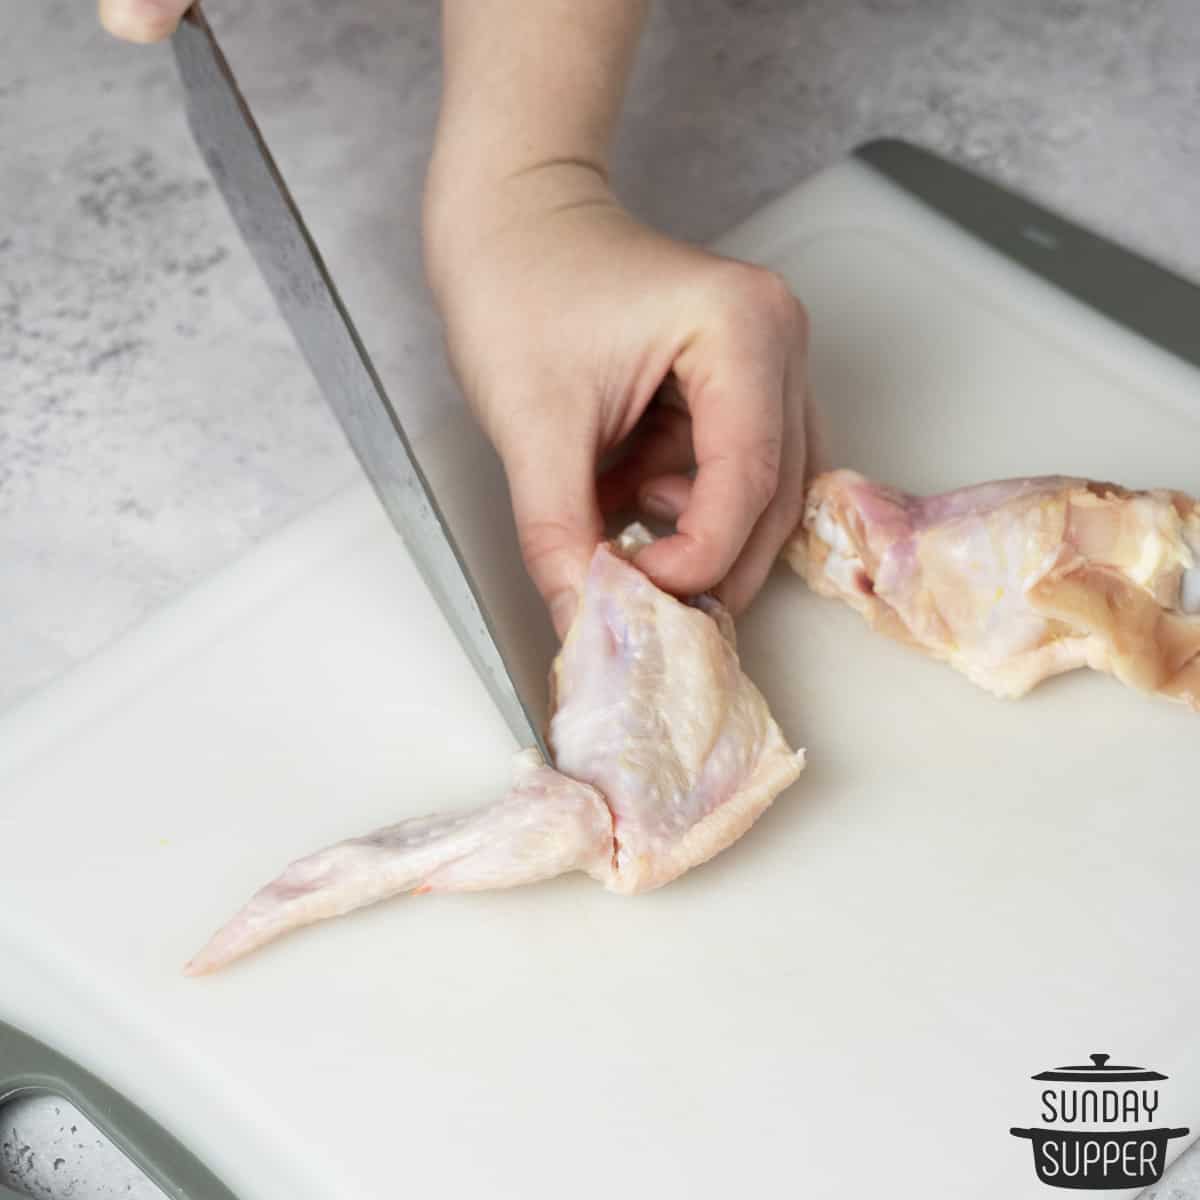 Slicing the wing tip off of a chicken wing using a sharp knife